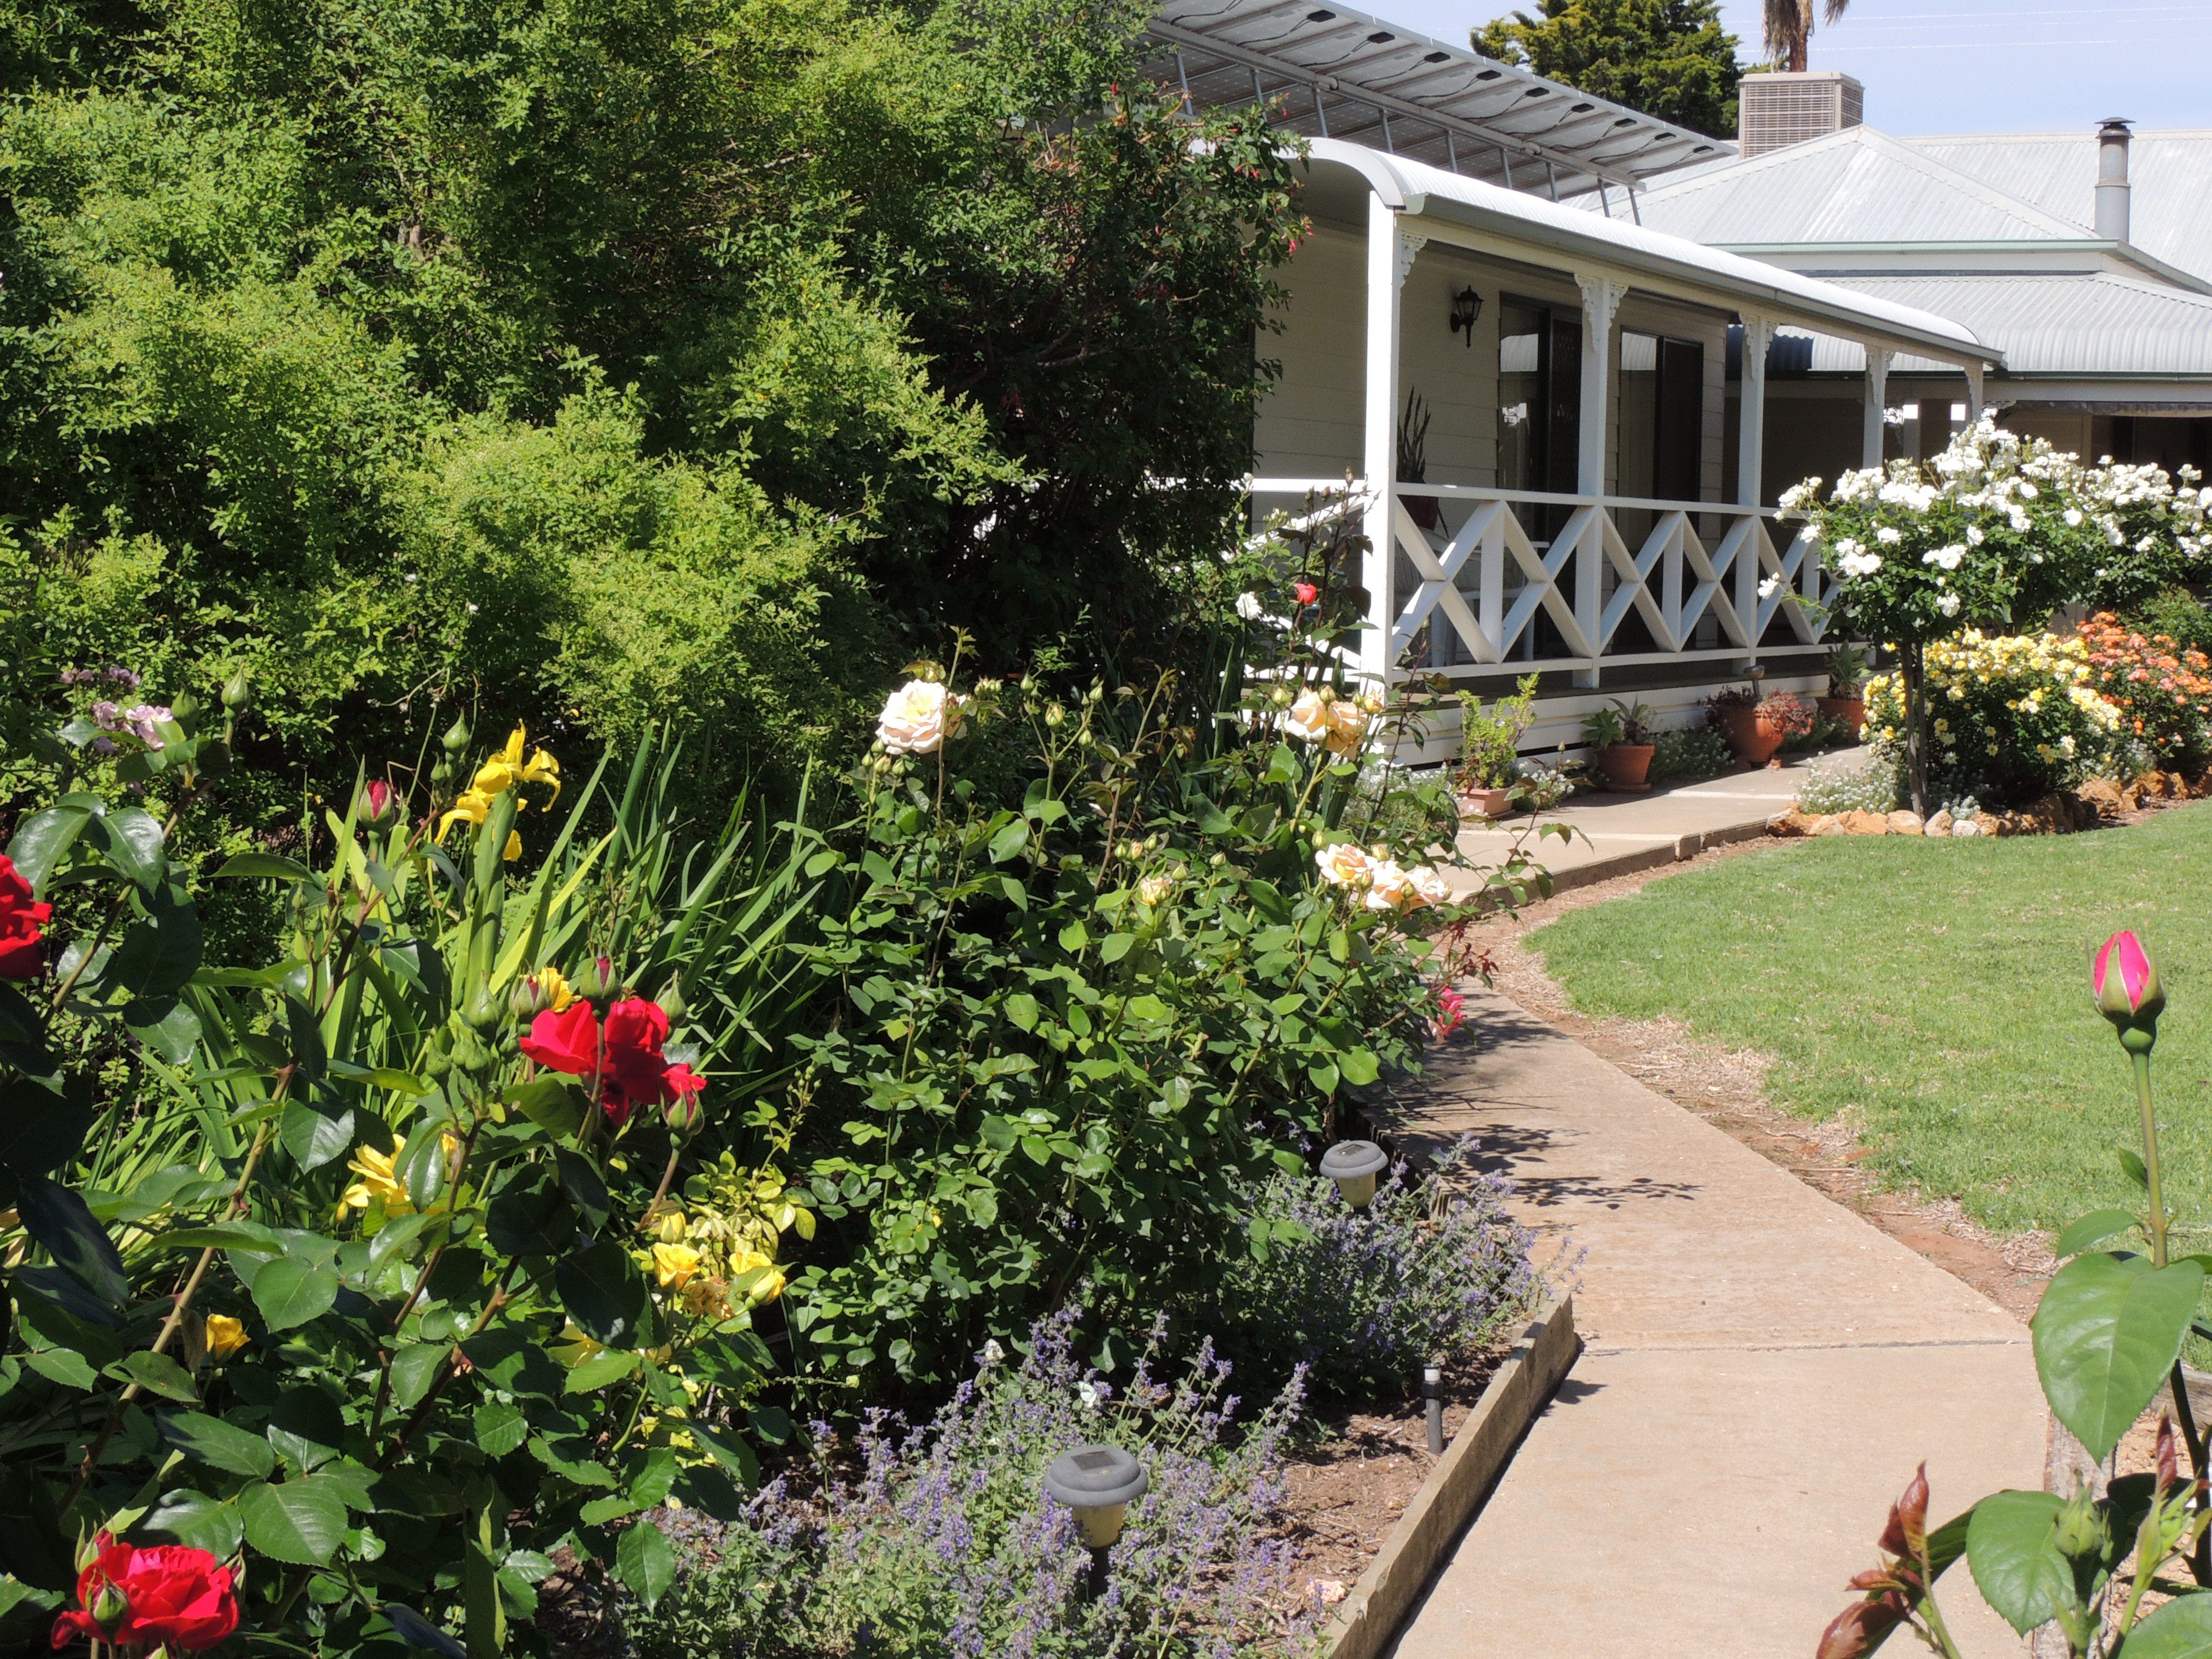 Burrabliss Bed and Breakfast - Surfers Gold Coast